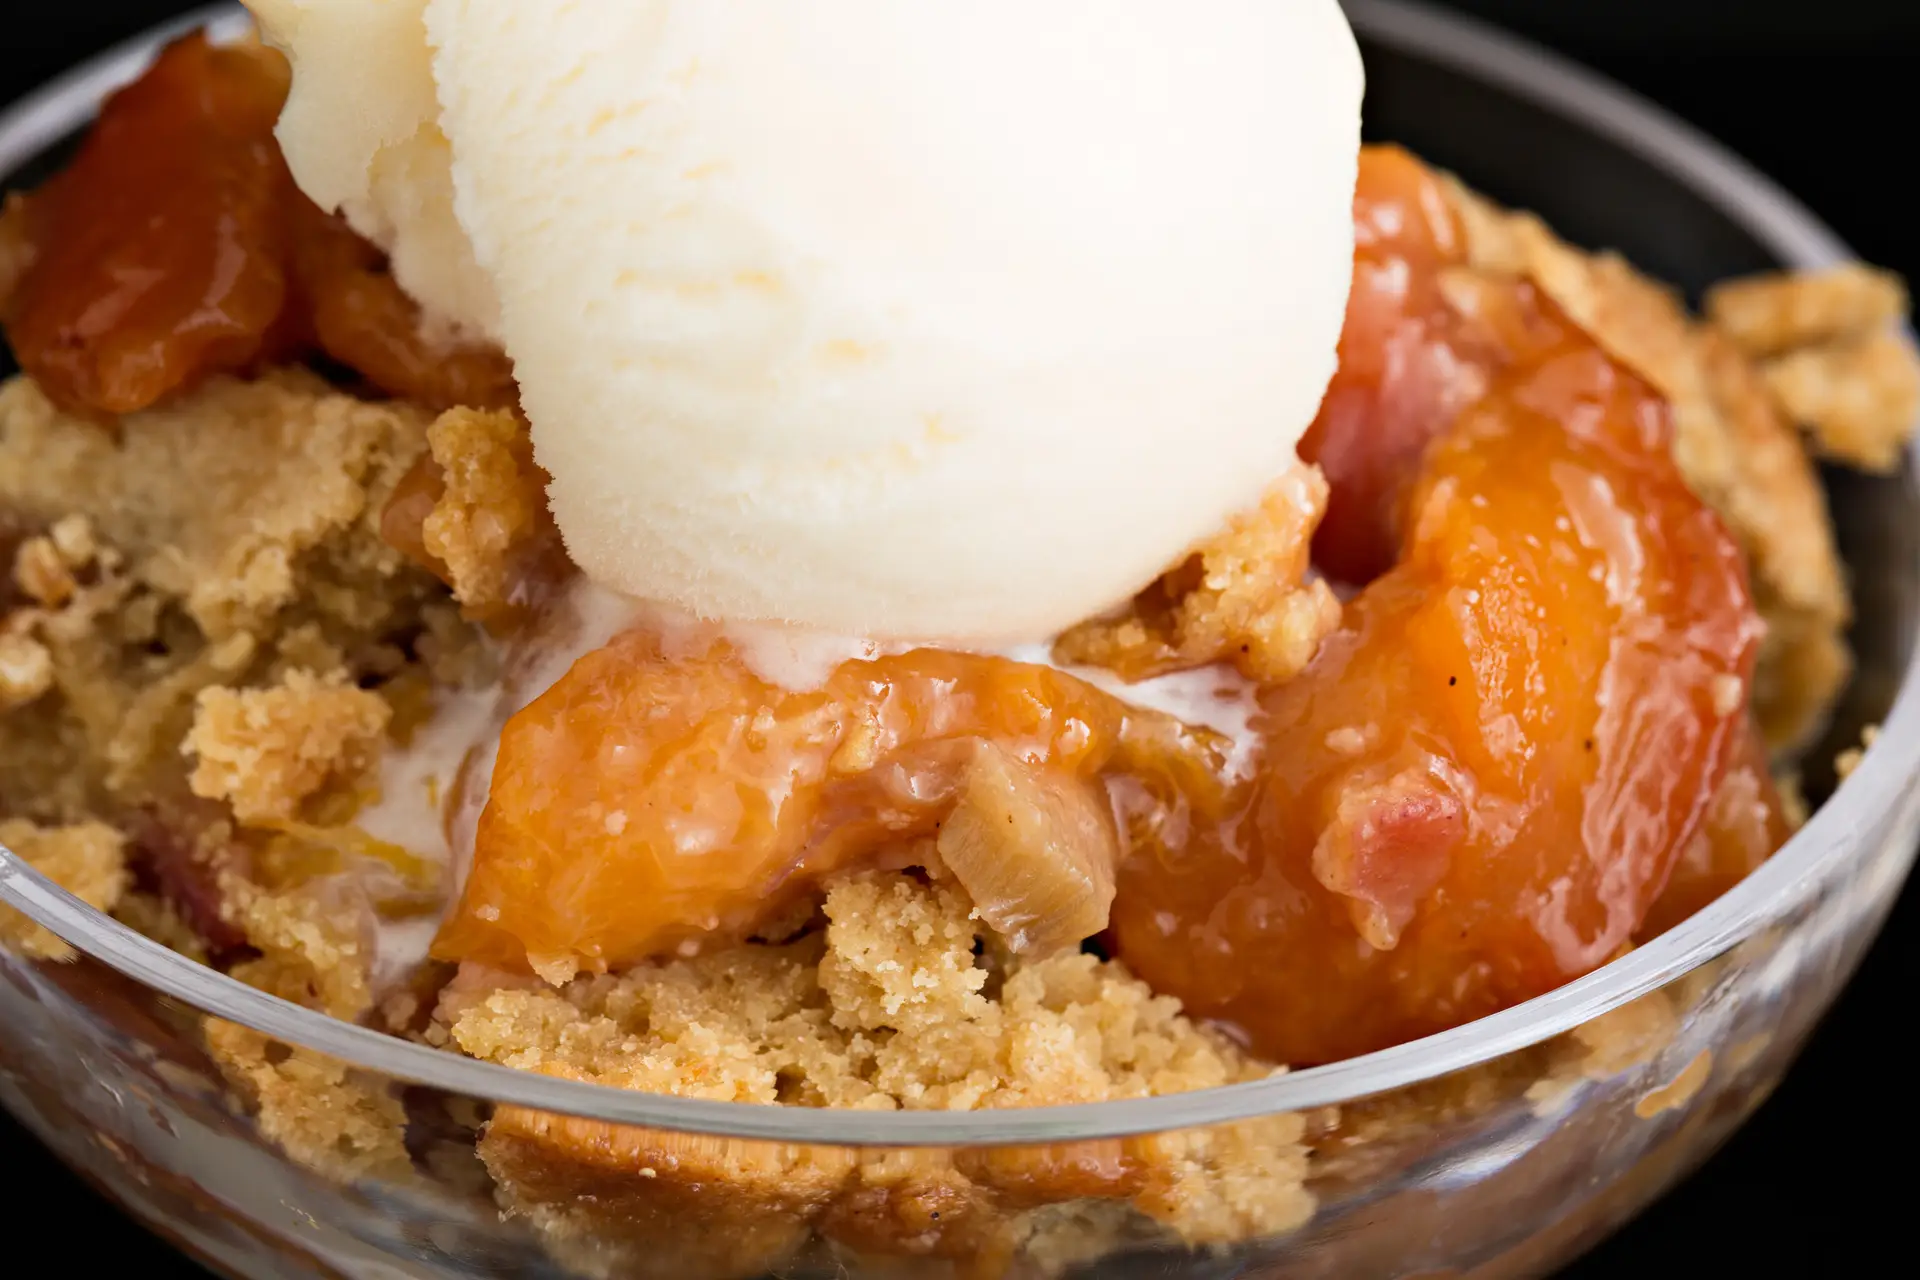 hot peach and rhubarb cobbler and a scoop of vanilla ice cream.